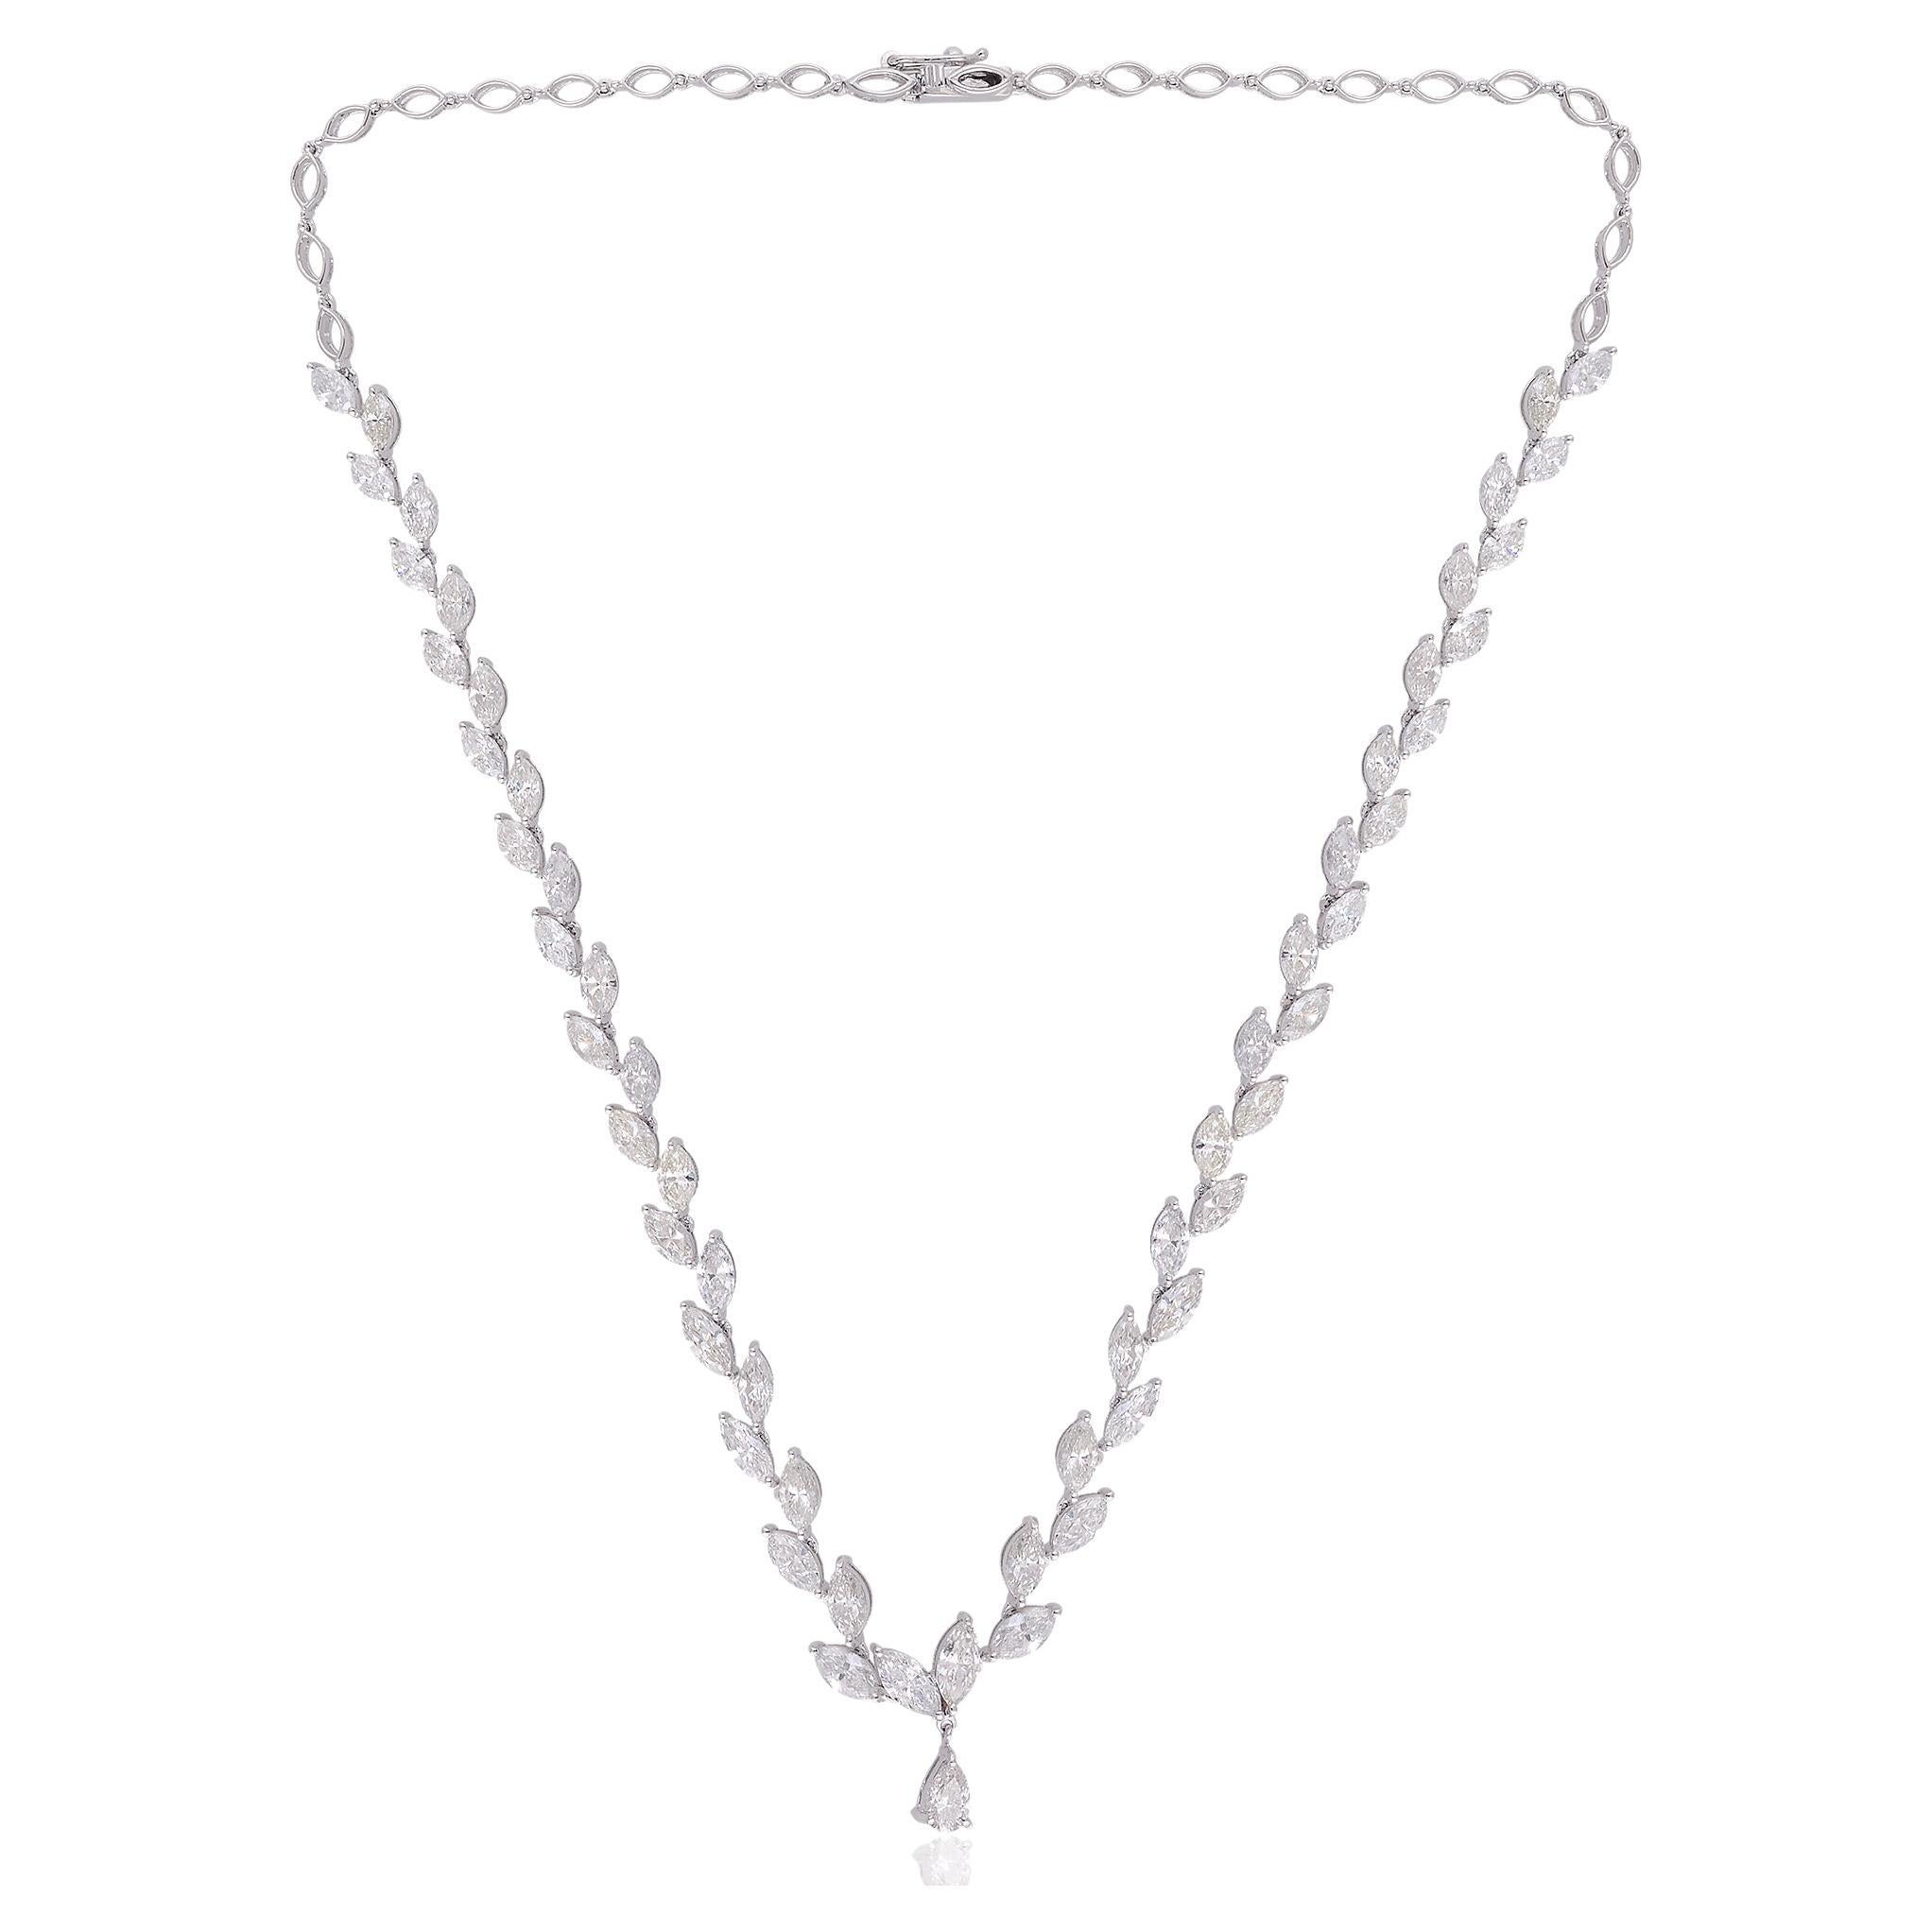 SI Clarity HI Color Pear & Marquise Diamond Necklace 18k White Gold Fine Jewelry